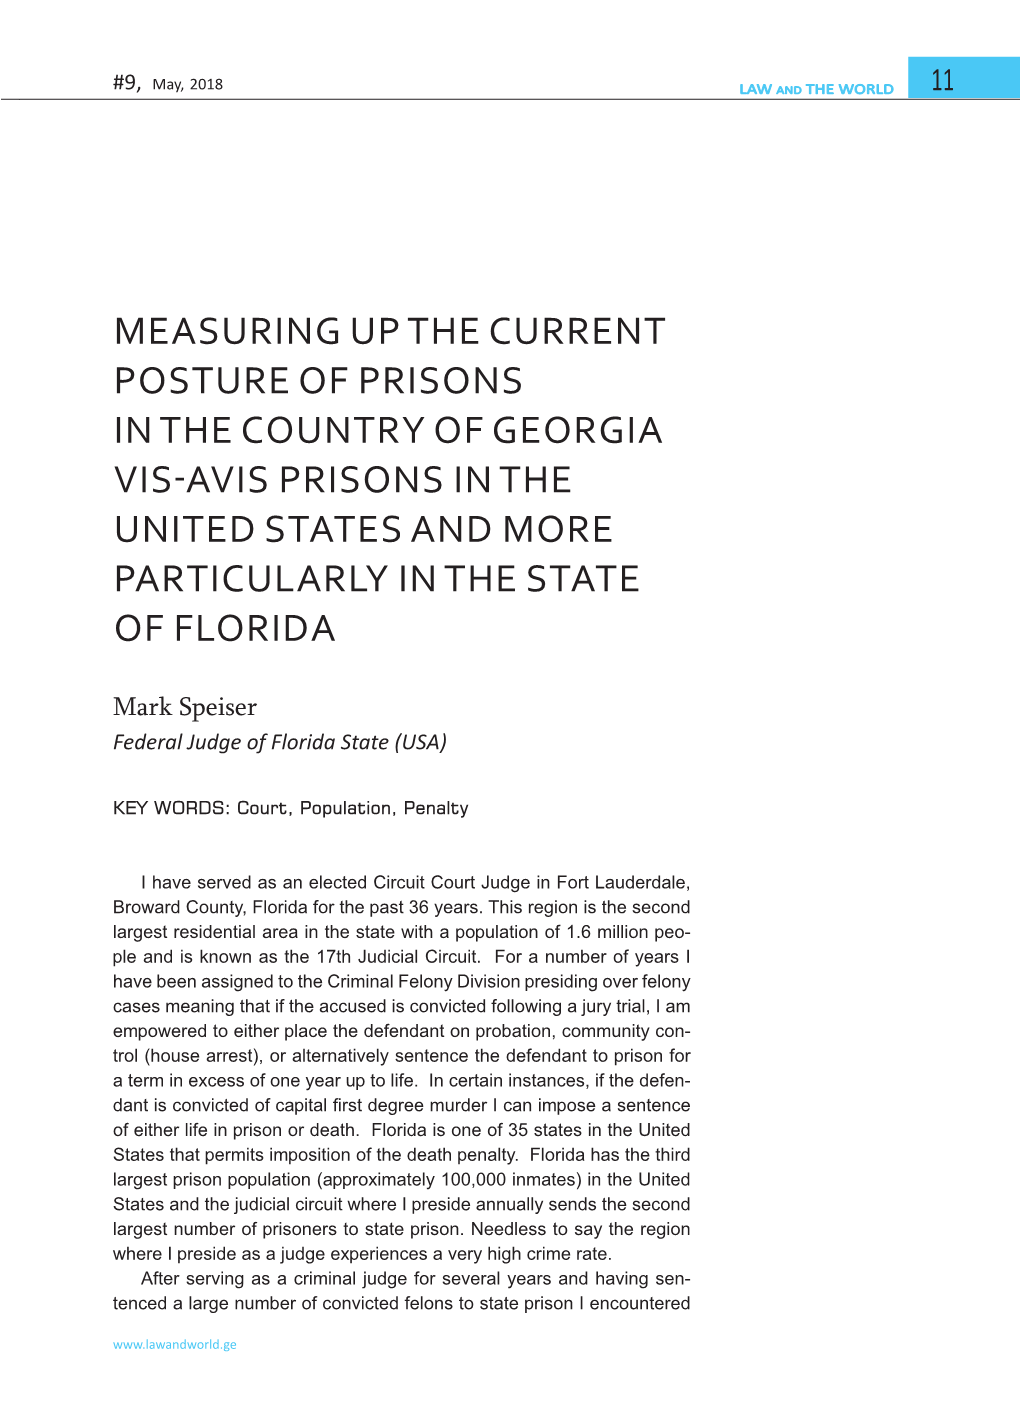 Measuring up the Current Posture of Prisons in The